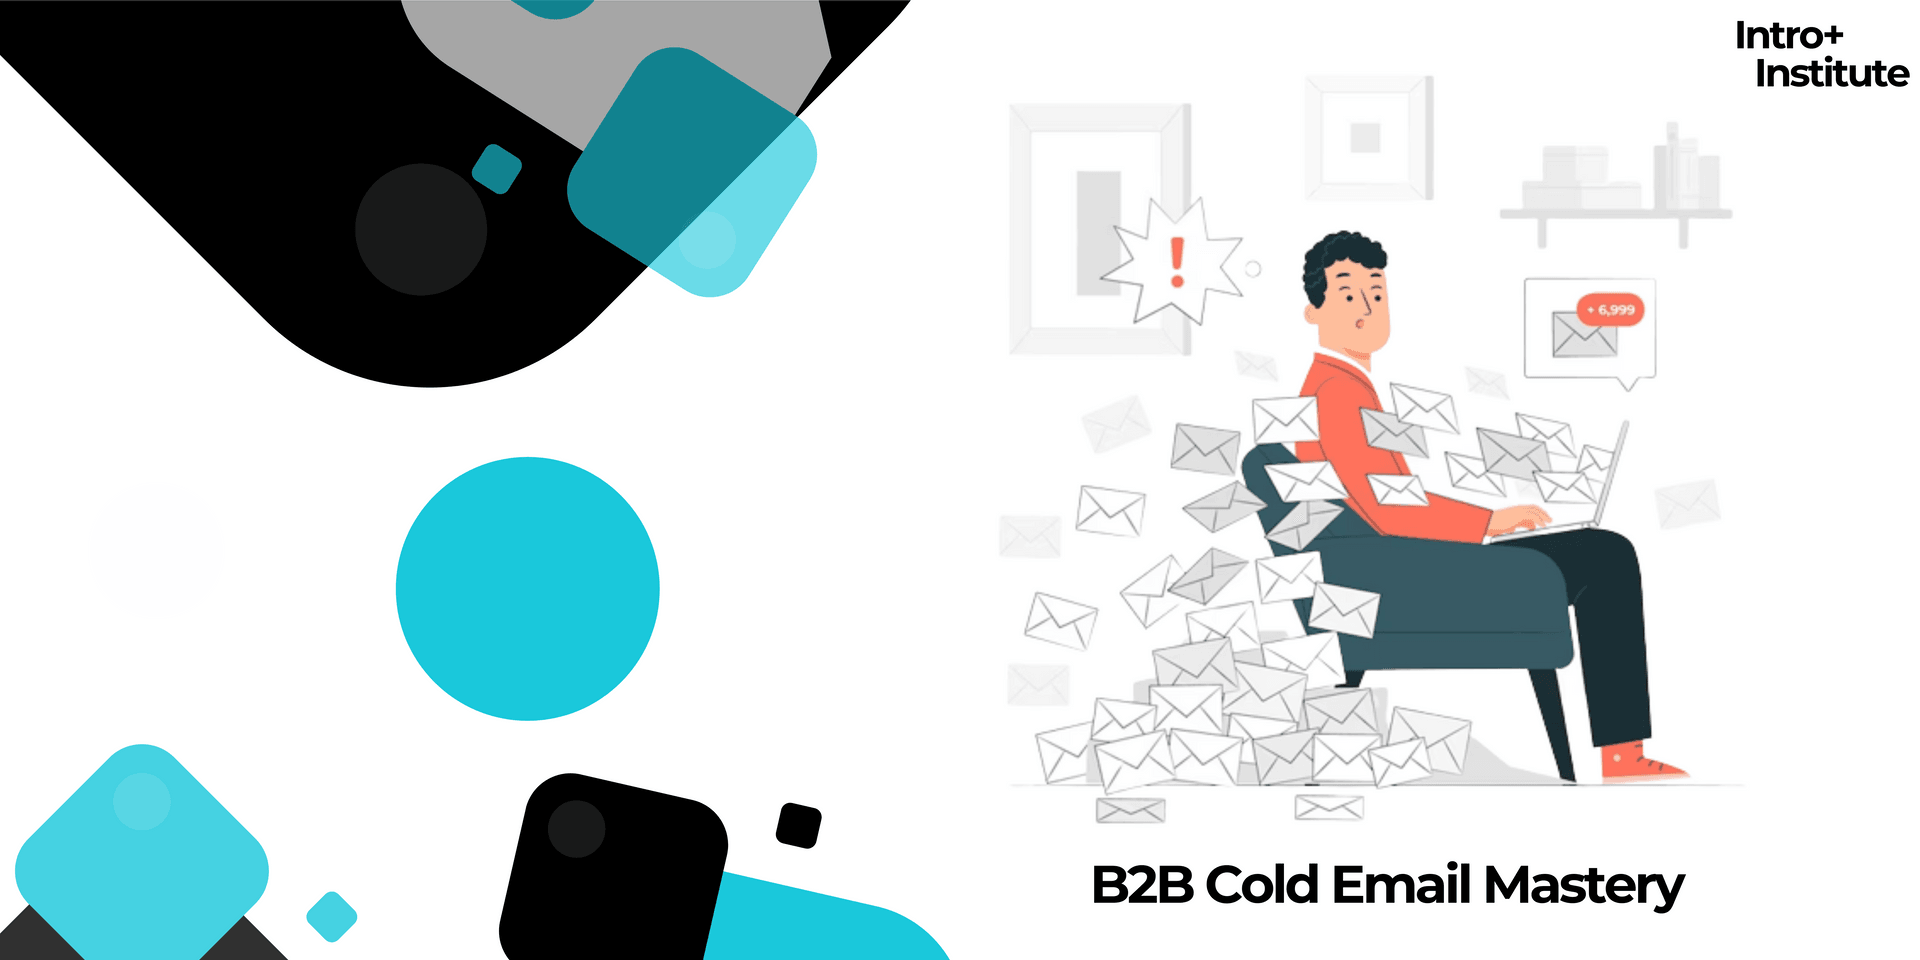 B2B Cold Email Mastery